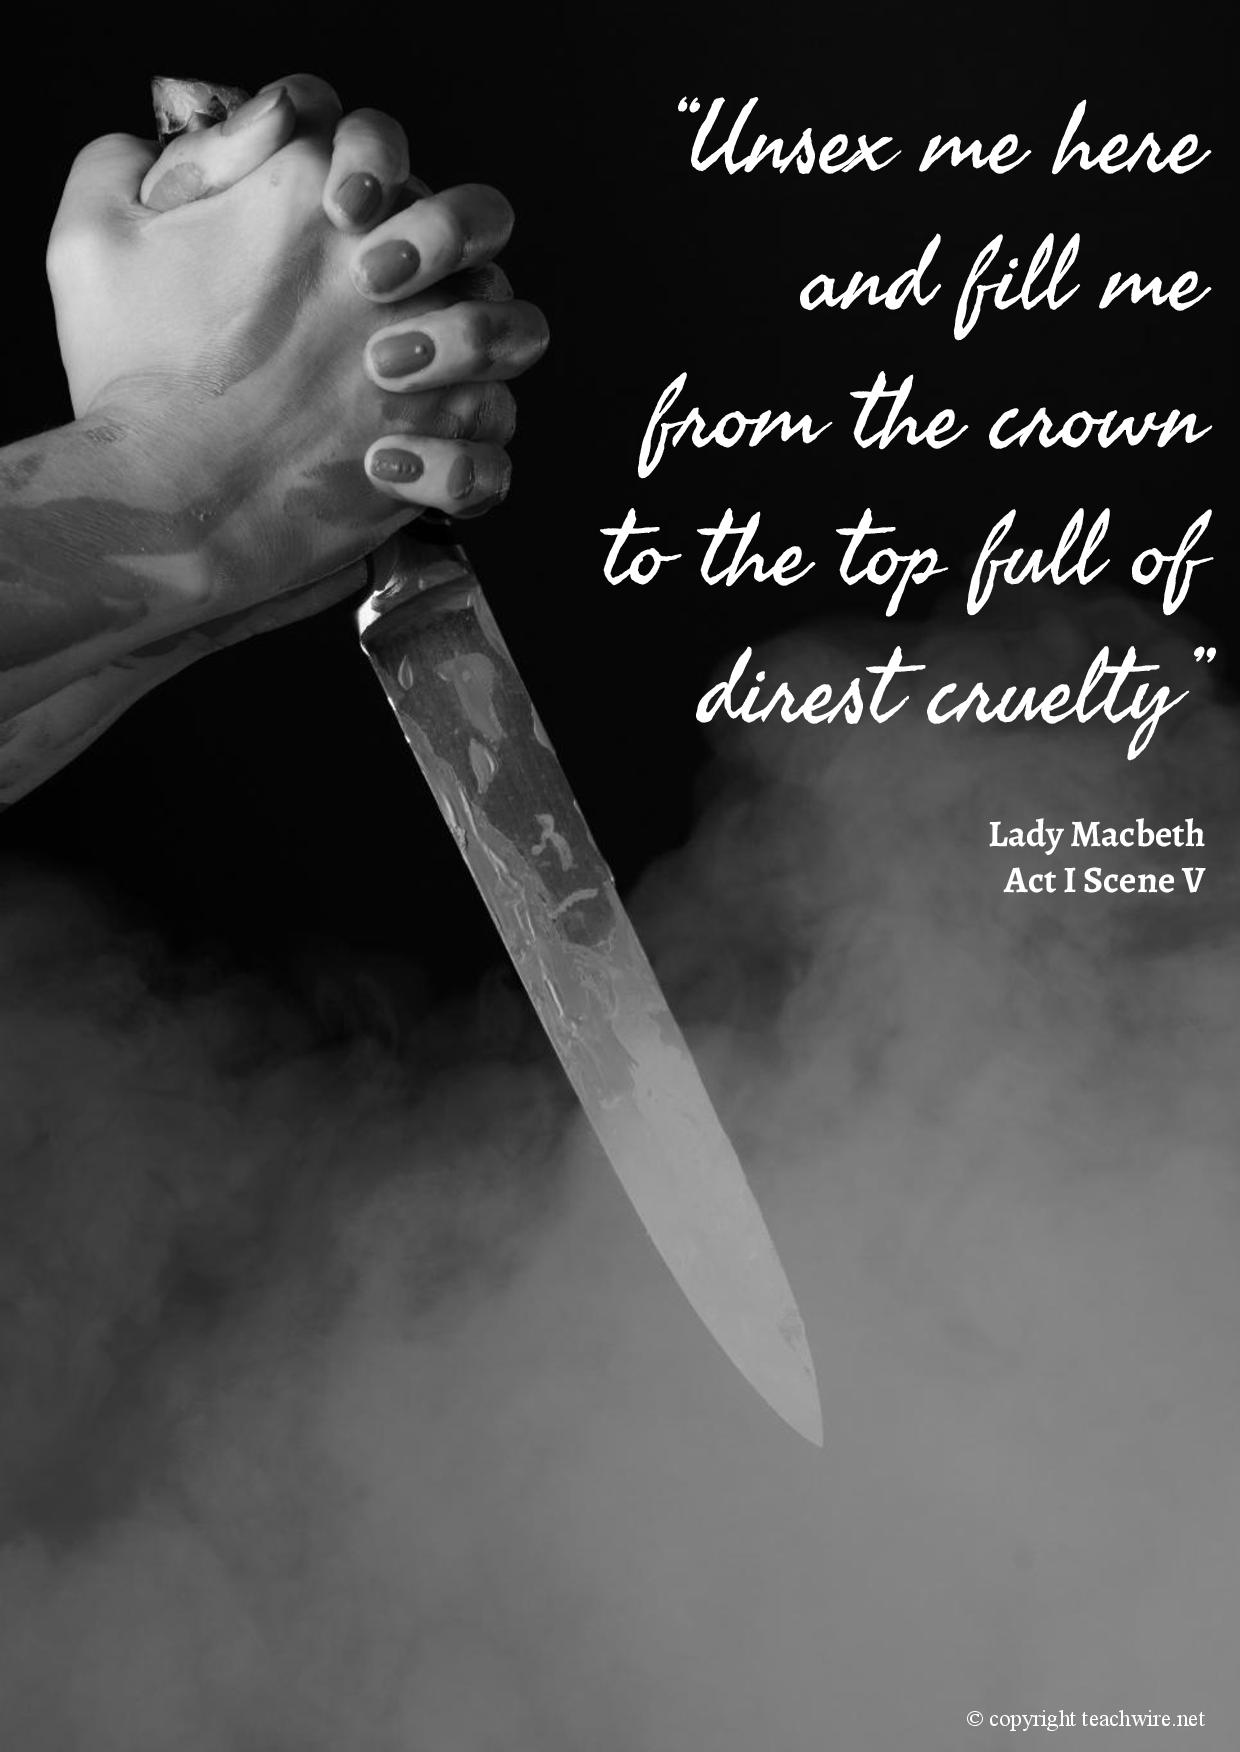 Lady Macbeth  Key Quotes  for Studying Shakespeare  s Macbeth  